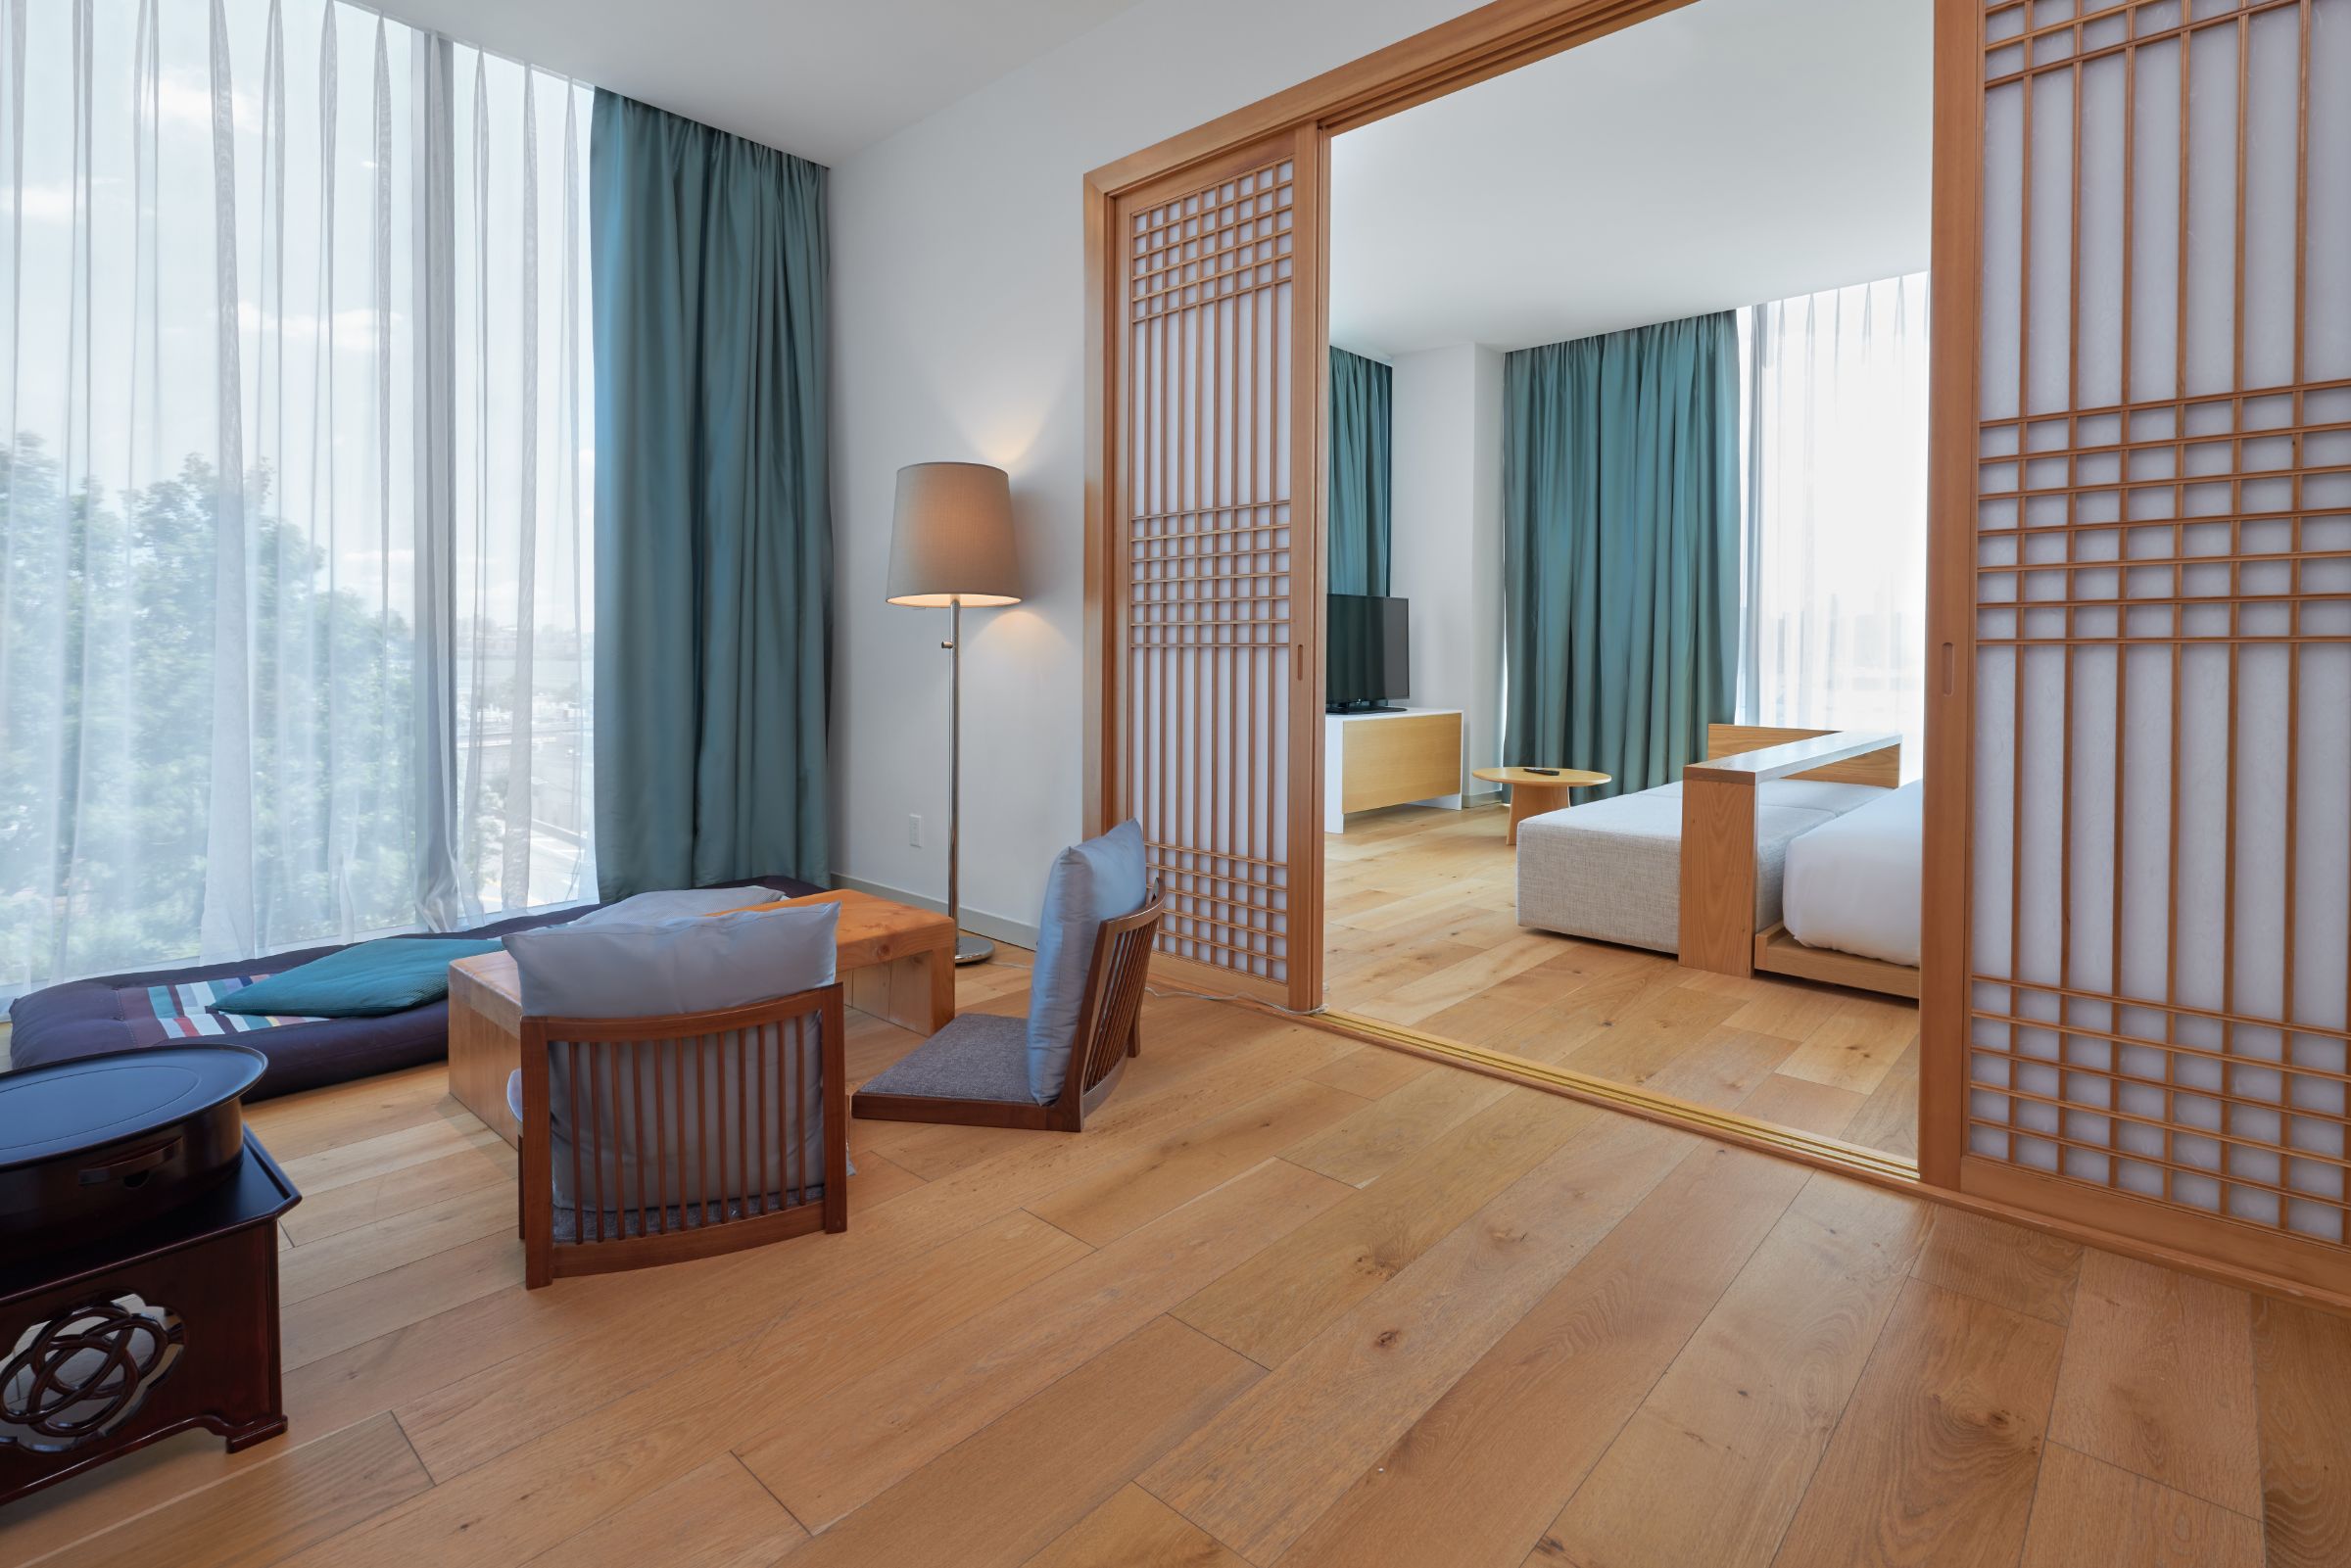 Corner Suite at Hotel SoJo designed with Eastern Asian aesthetic, sitting tea room, bright lights and wood floors.